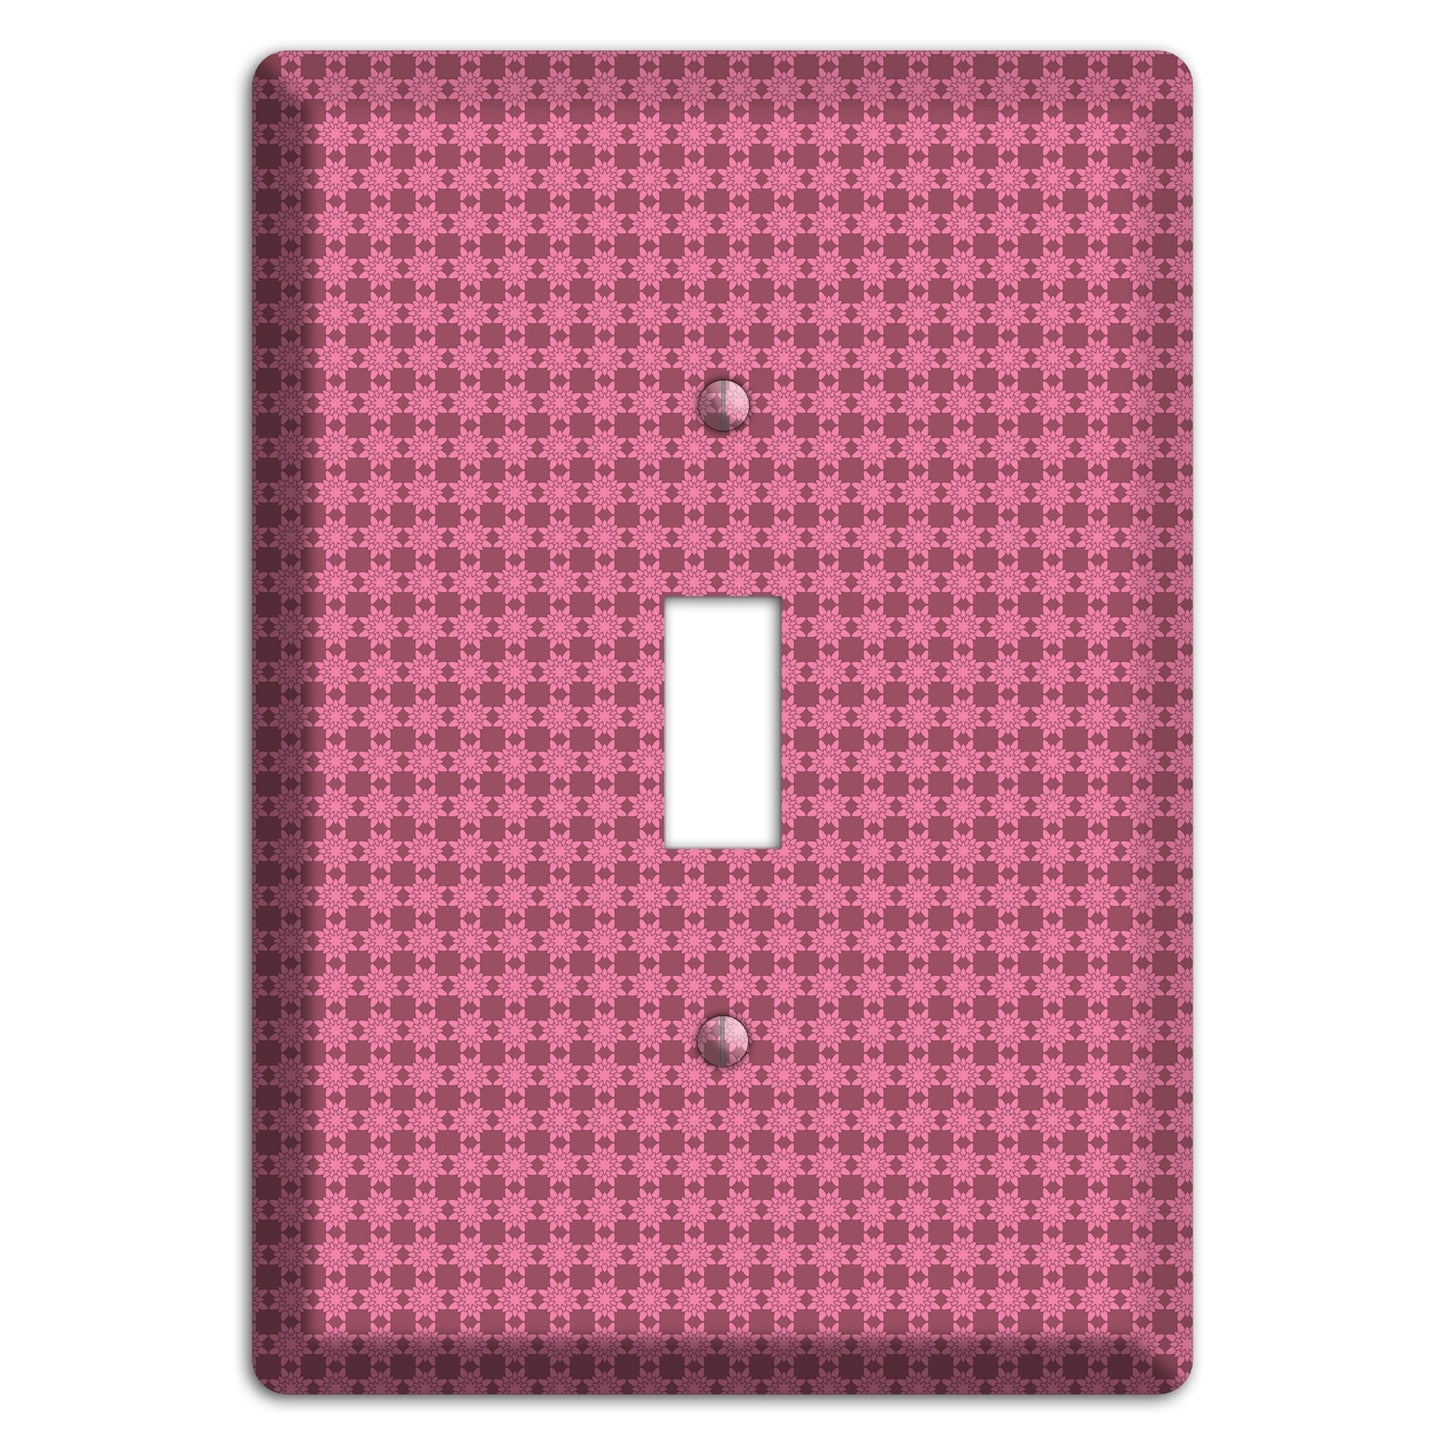 Multi Pink Tiled Cover Plates